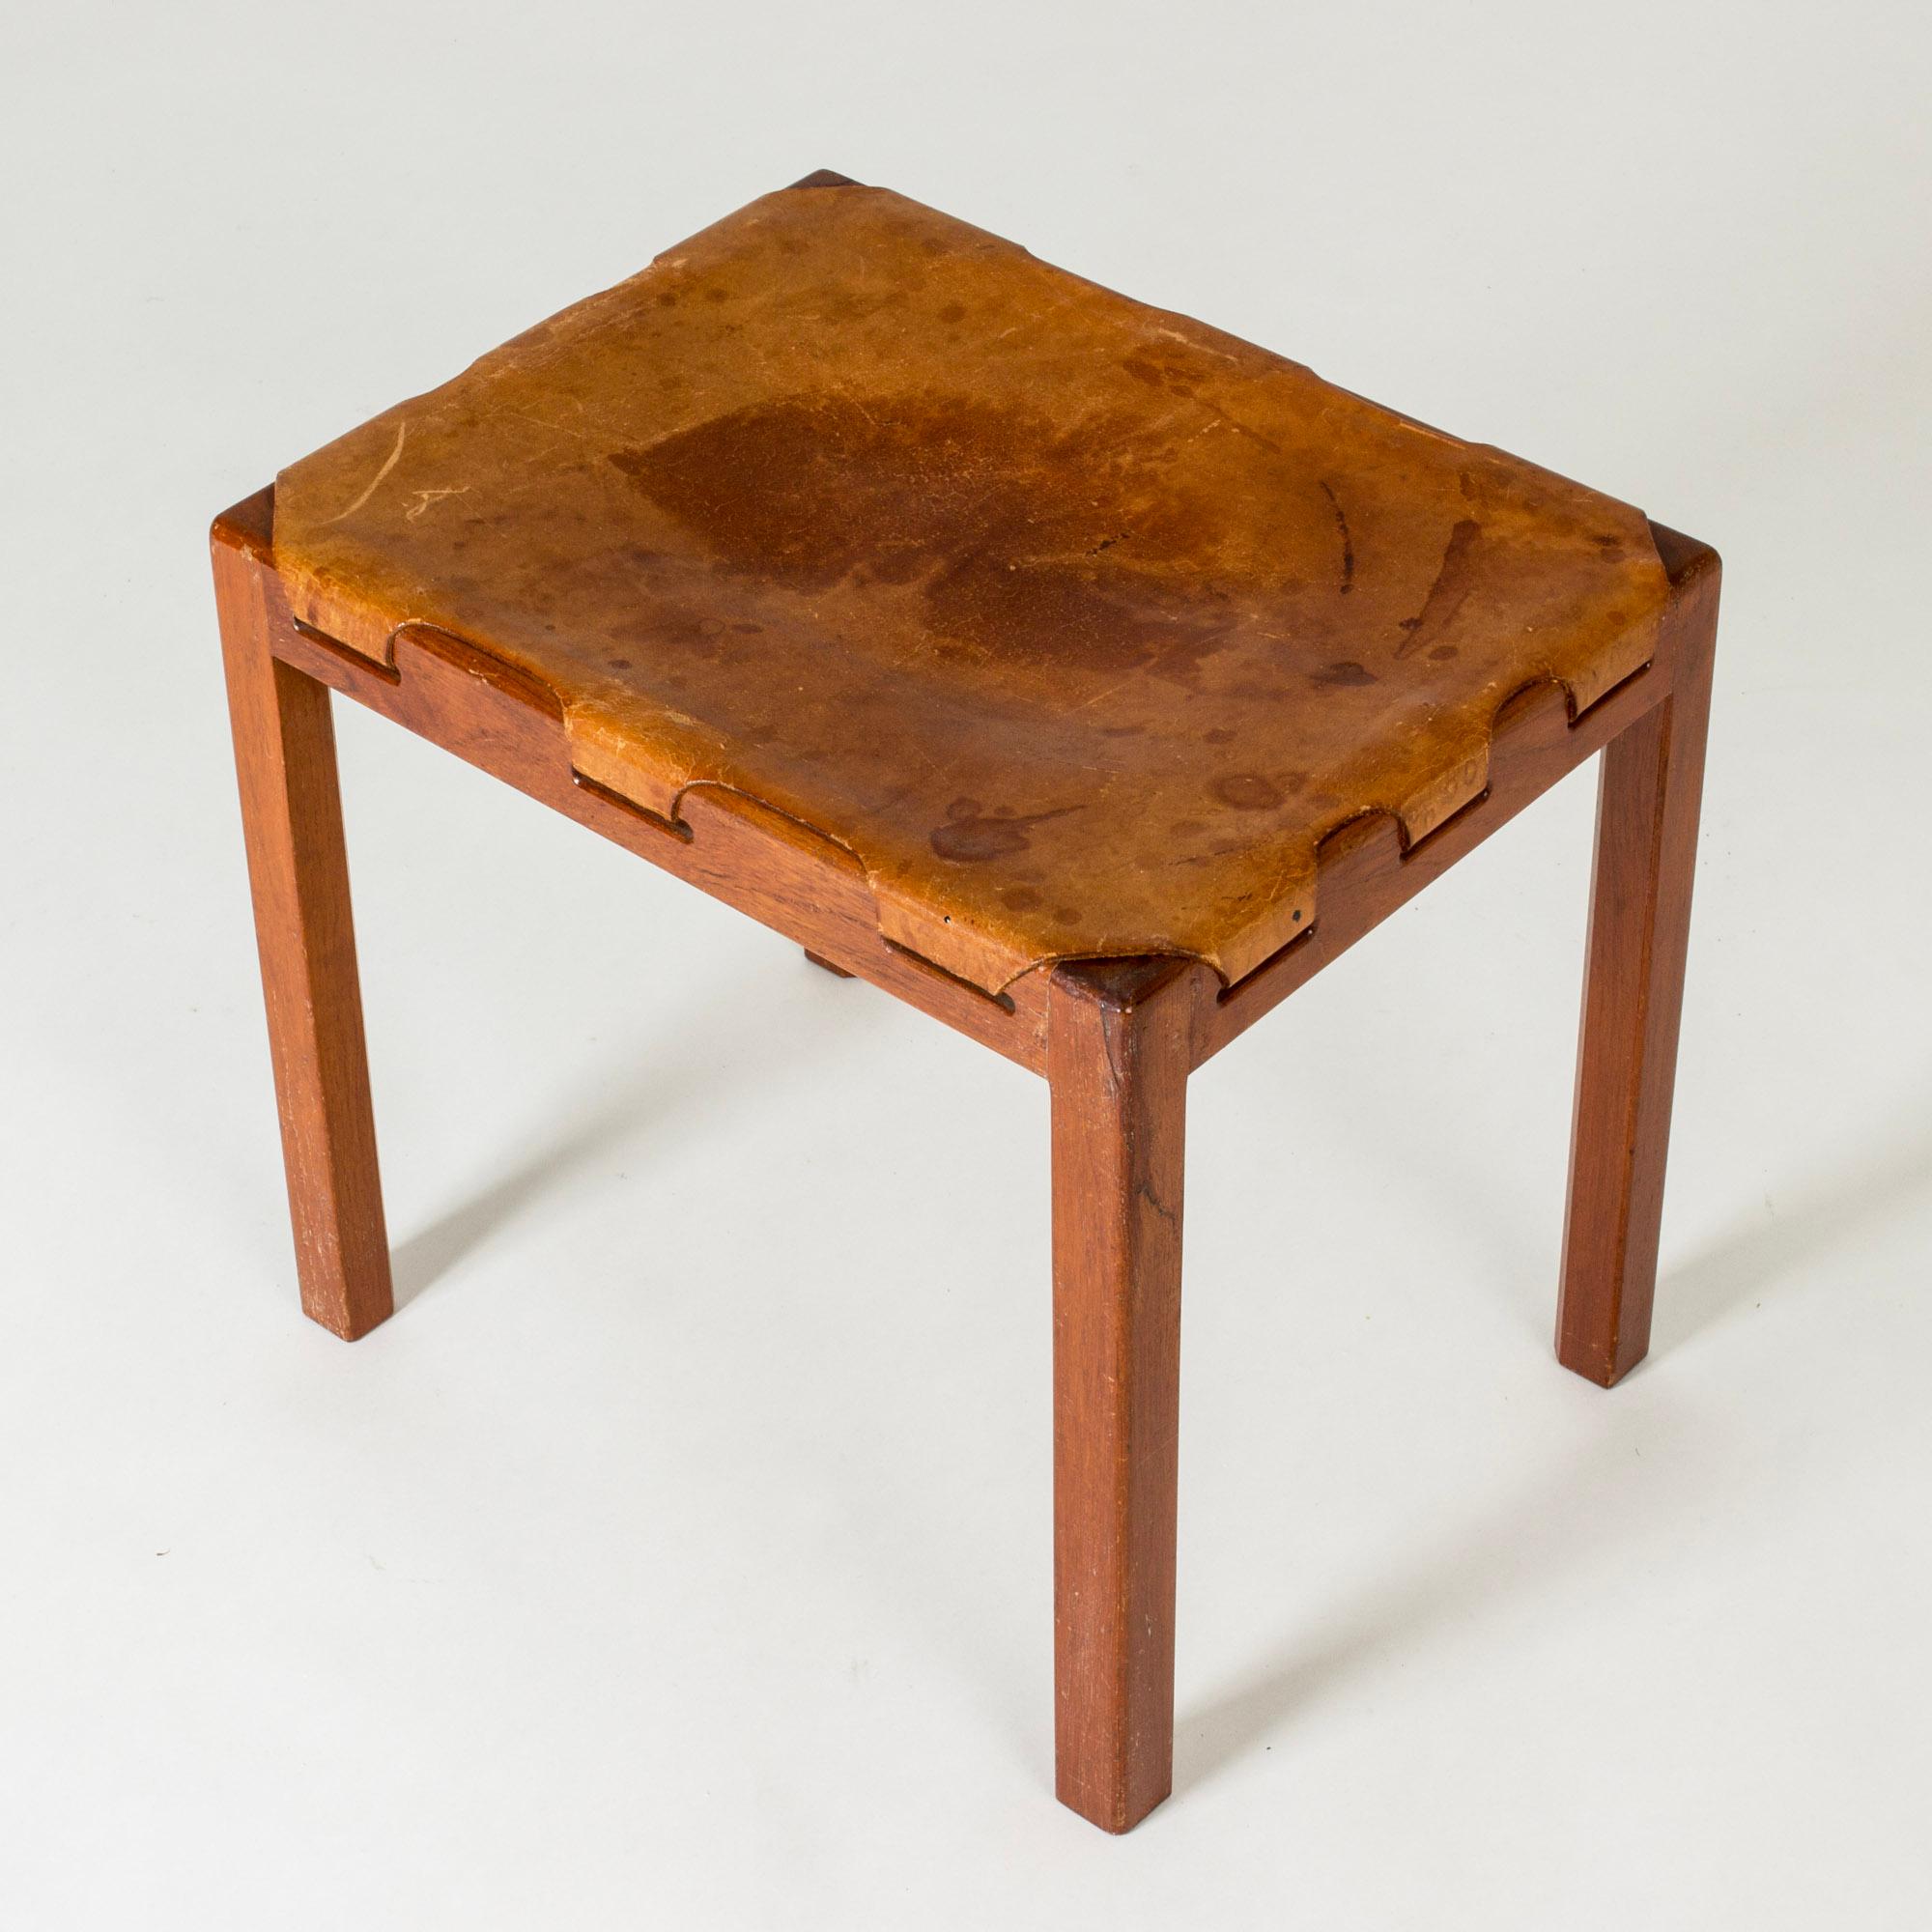 Scandinavian Modern Midcentury Modern Stool, mahogany and leather, Sweden, 1950s For Sale